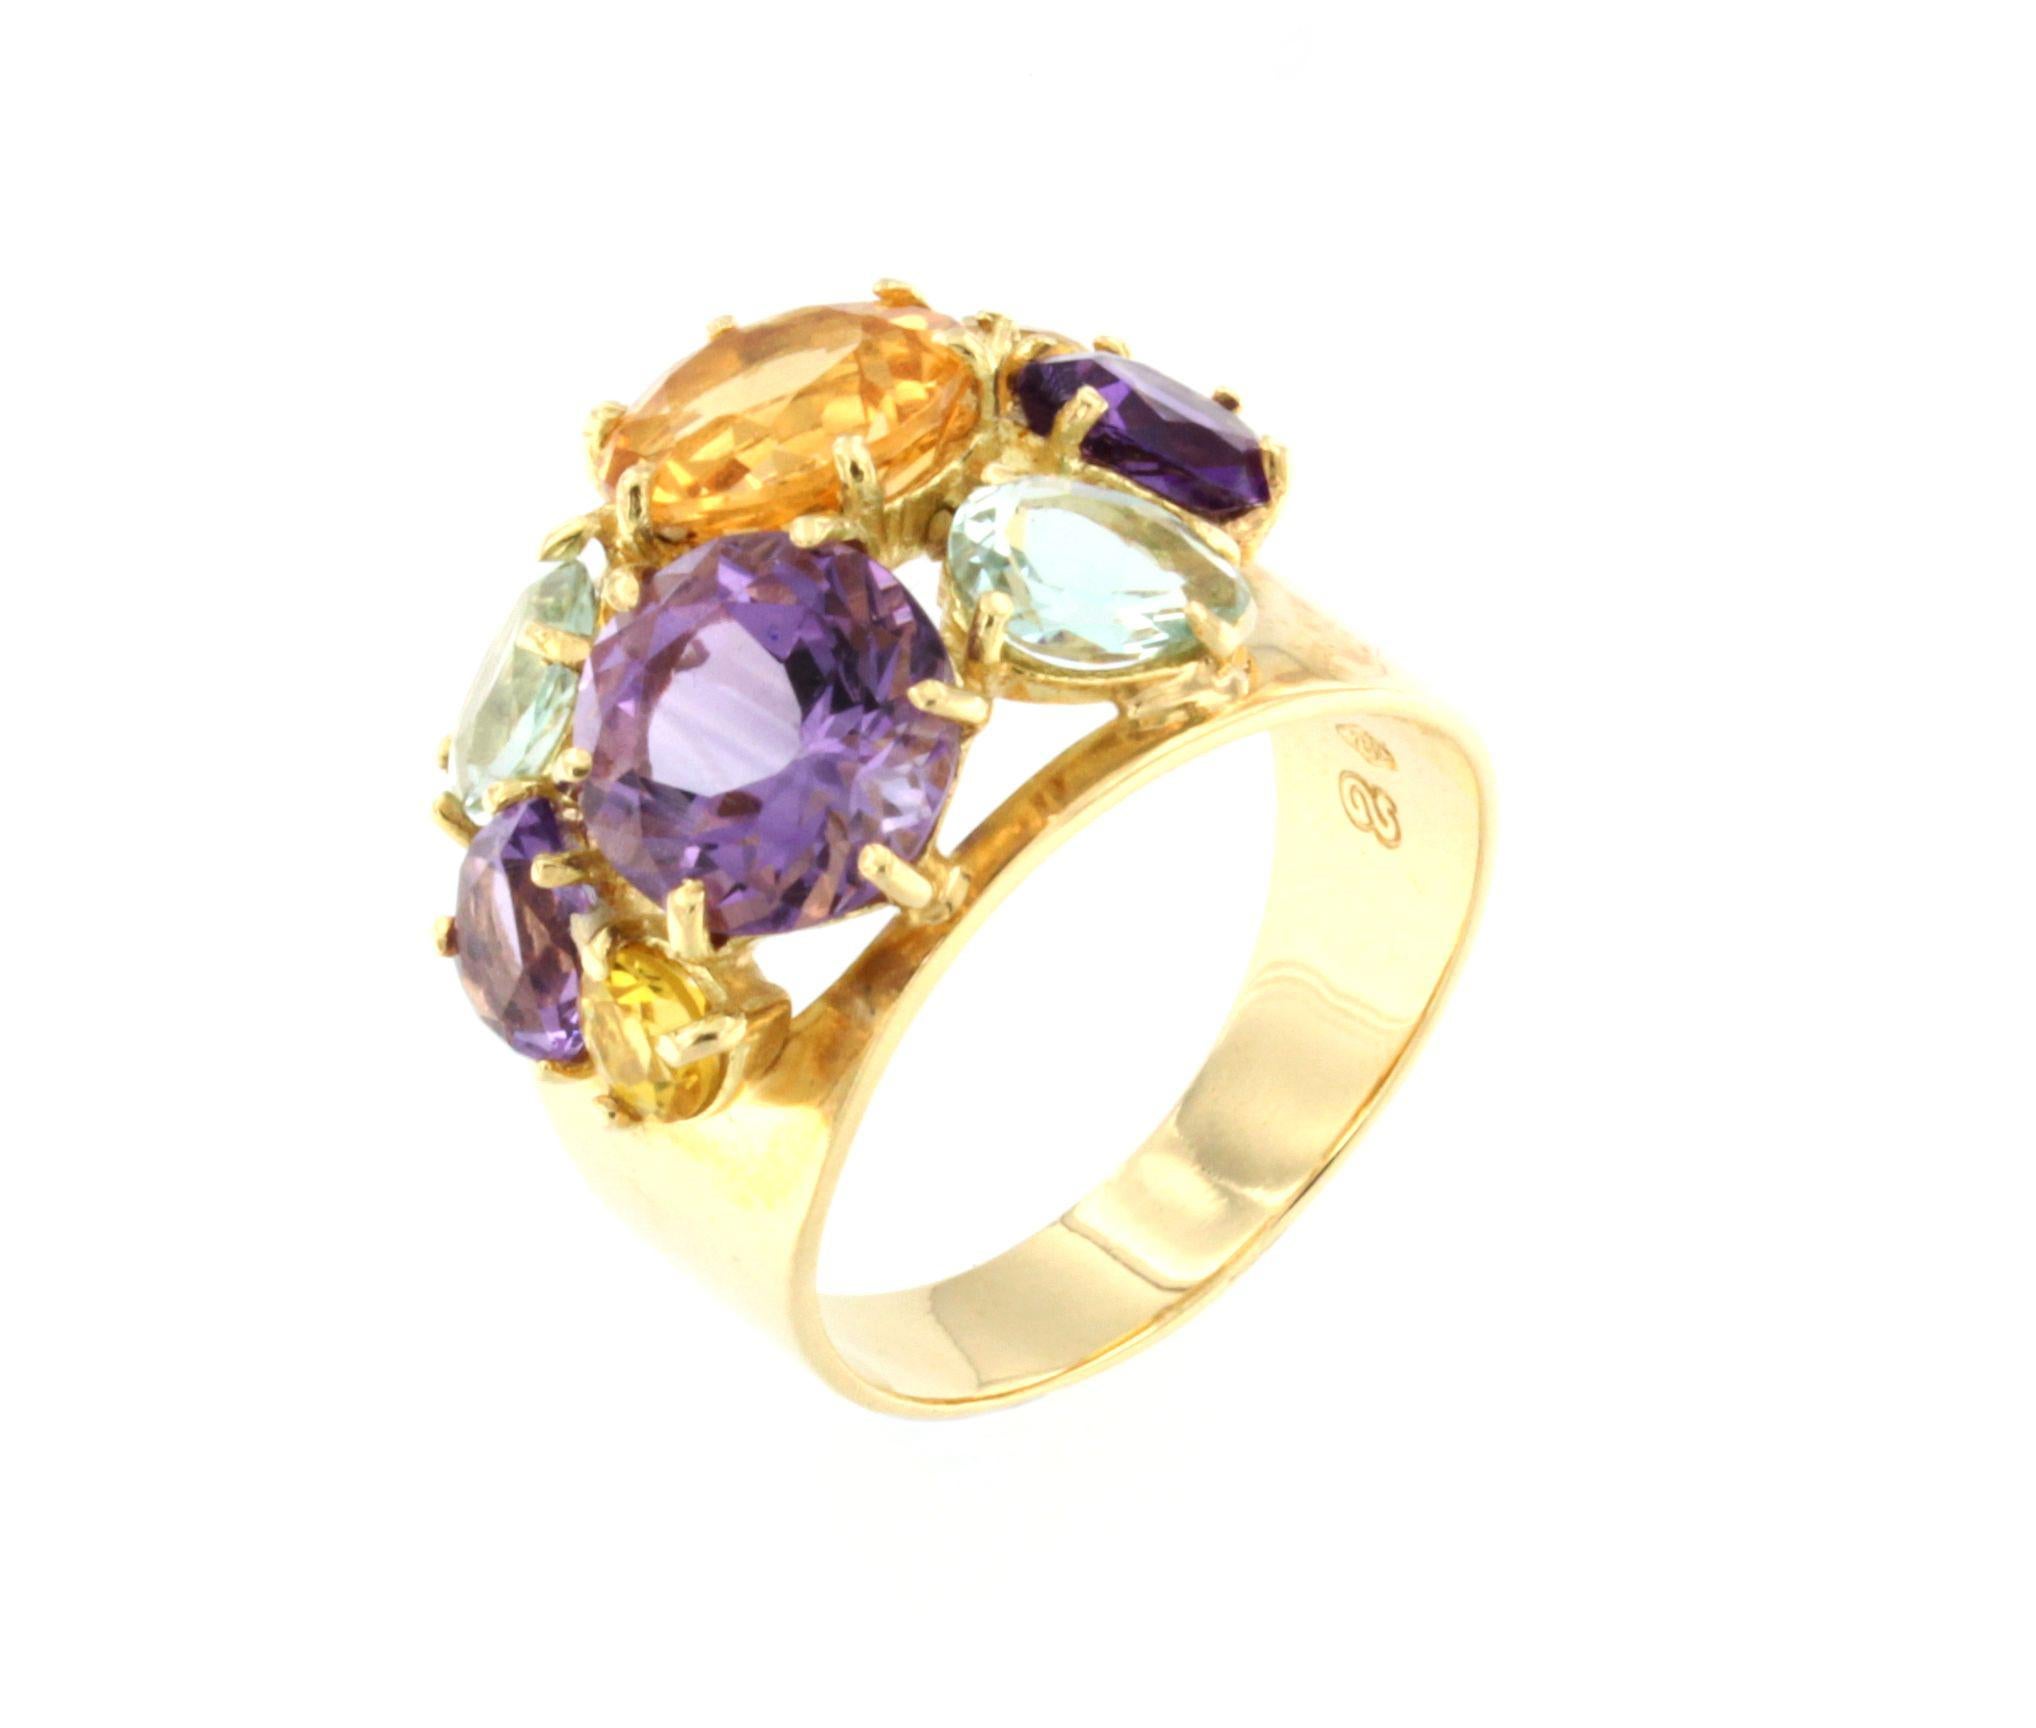  Delicate mix of colors for this modern ring in yellow gold made in Italy by Stanoppi Jewellery since 1948.


g.11.00    size of ring  : 20  -  60  - 9

All Stanoppi Jewelry is new and has never been previously owned or worn. Each item will arrive